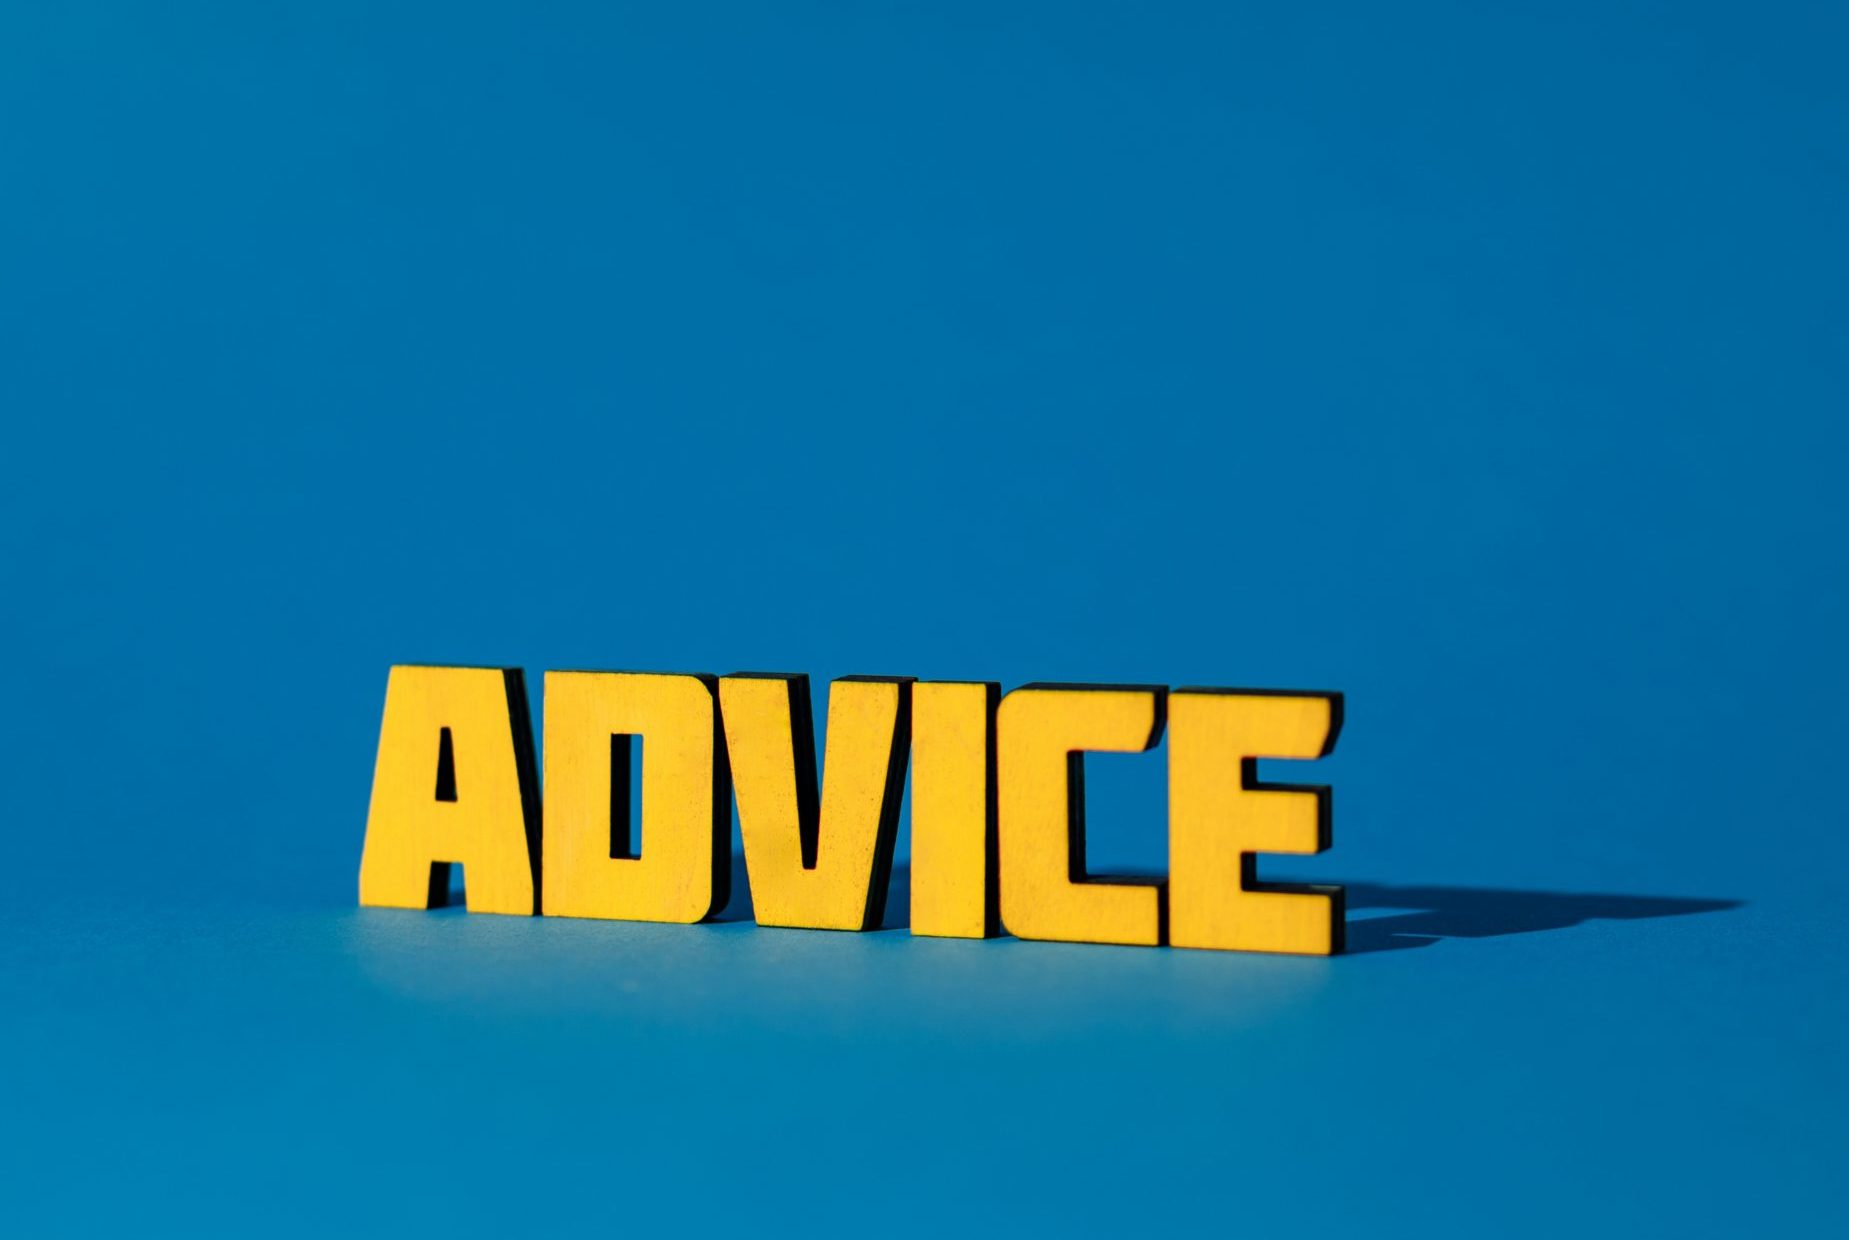 The word "advice" in yellow on a blue background